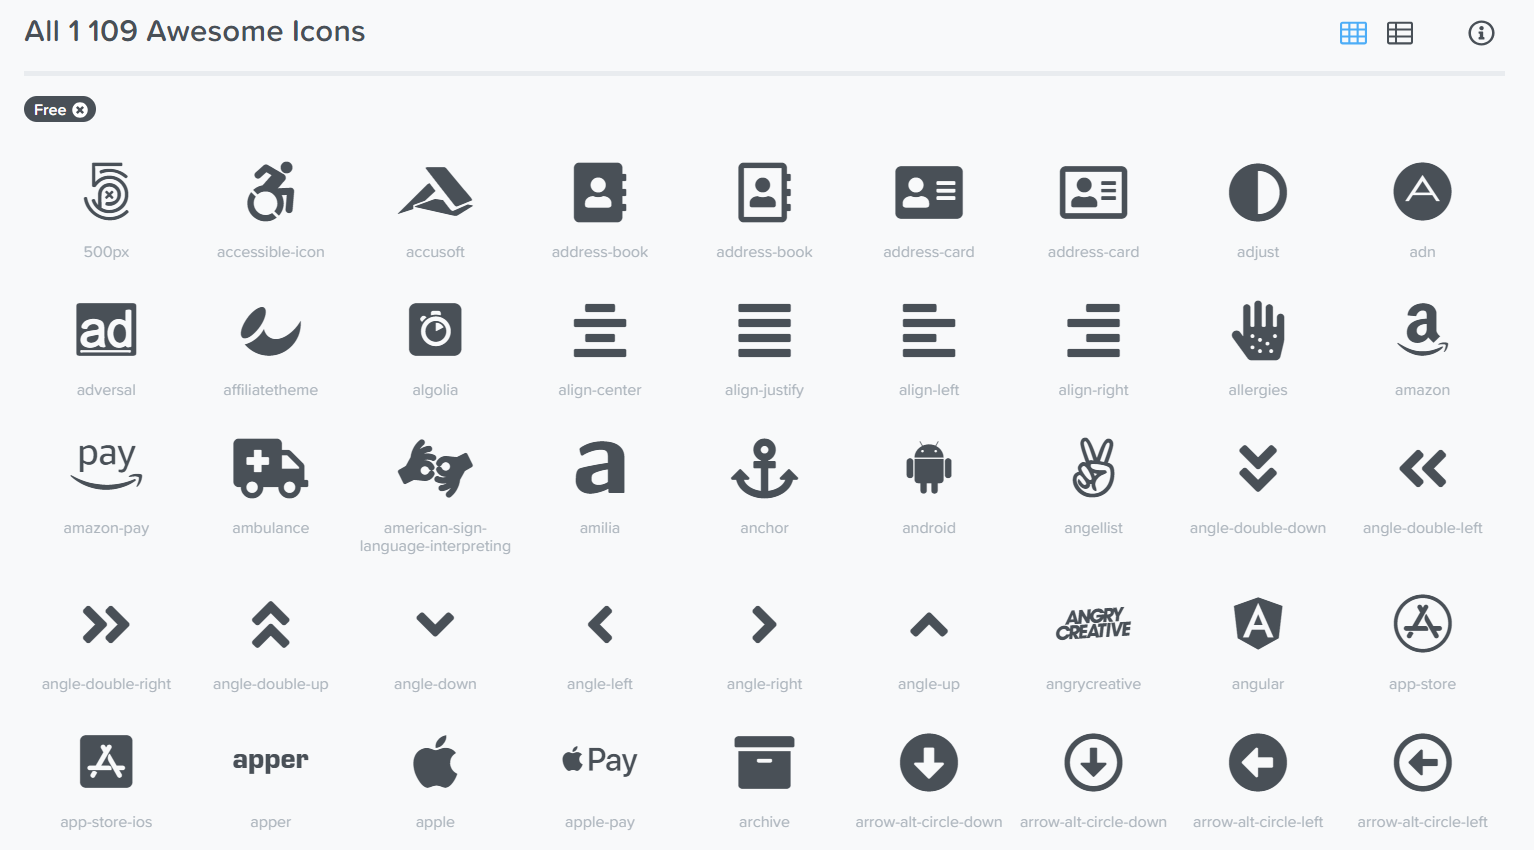 mfp-icon-examples.png